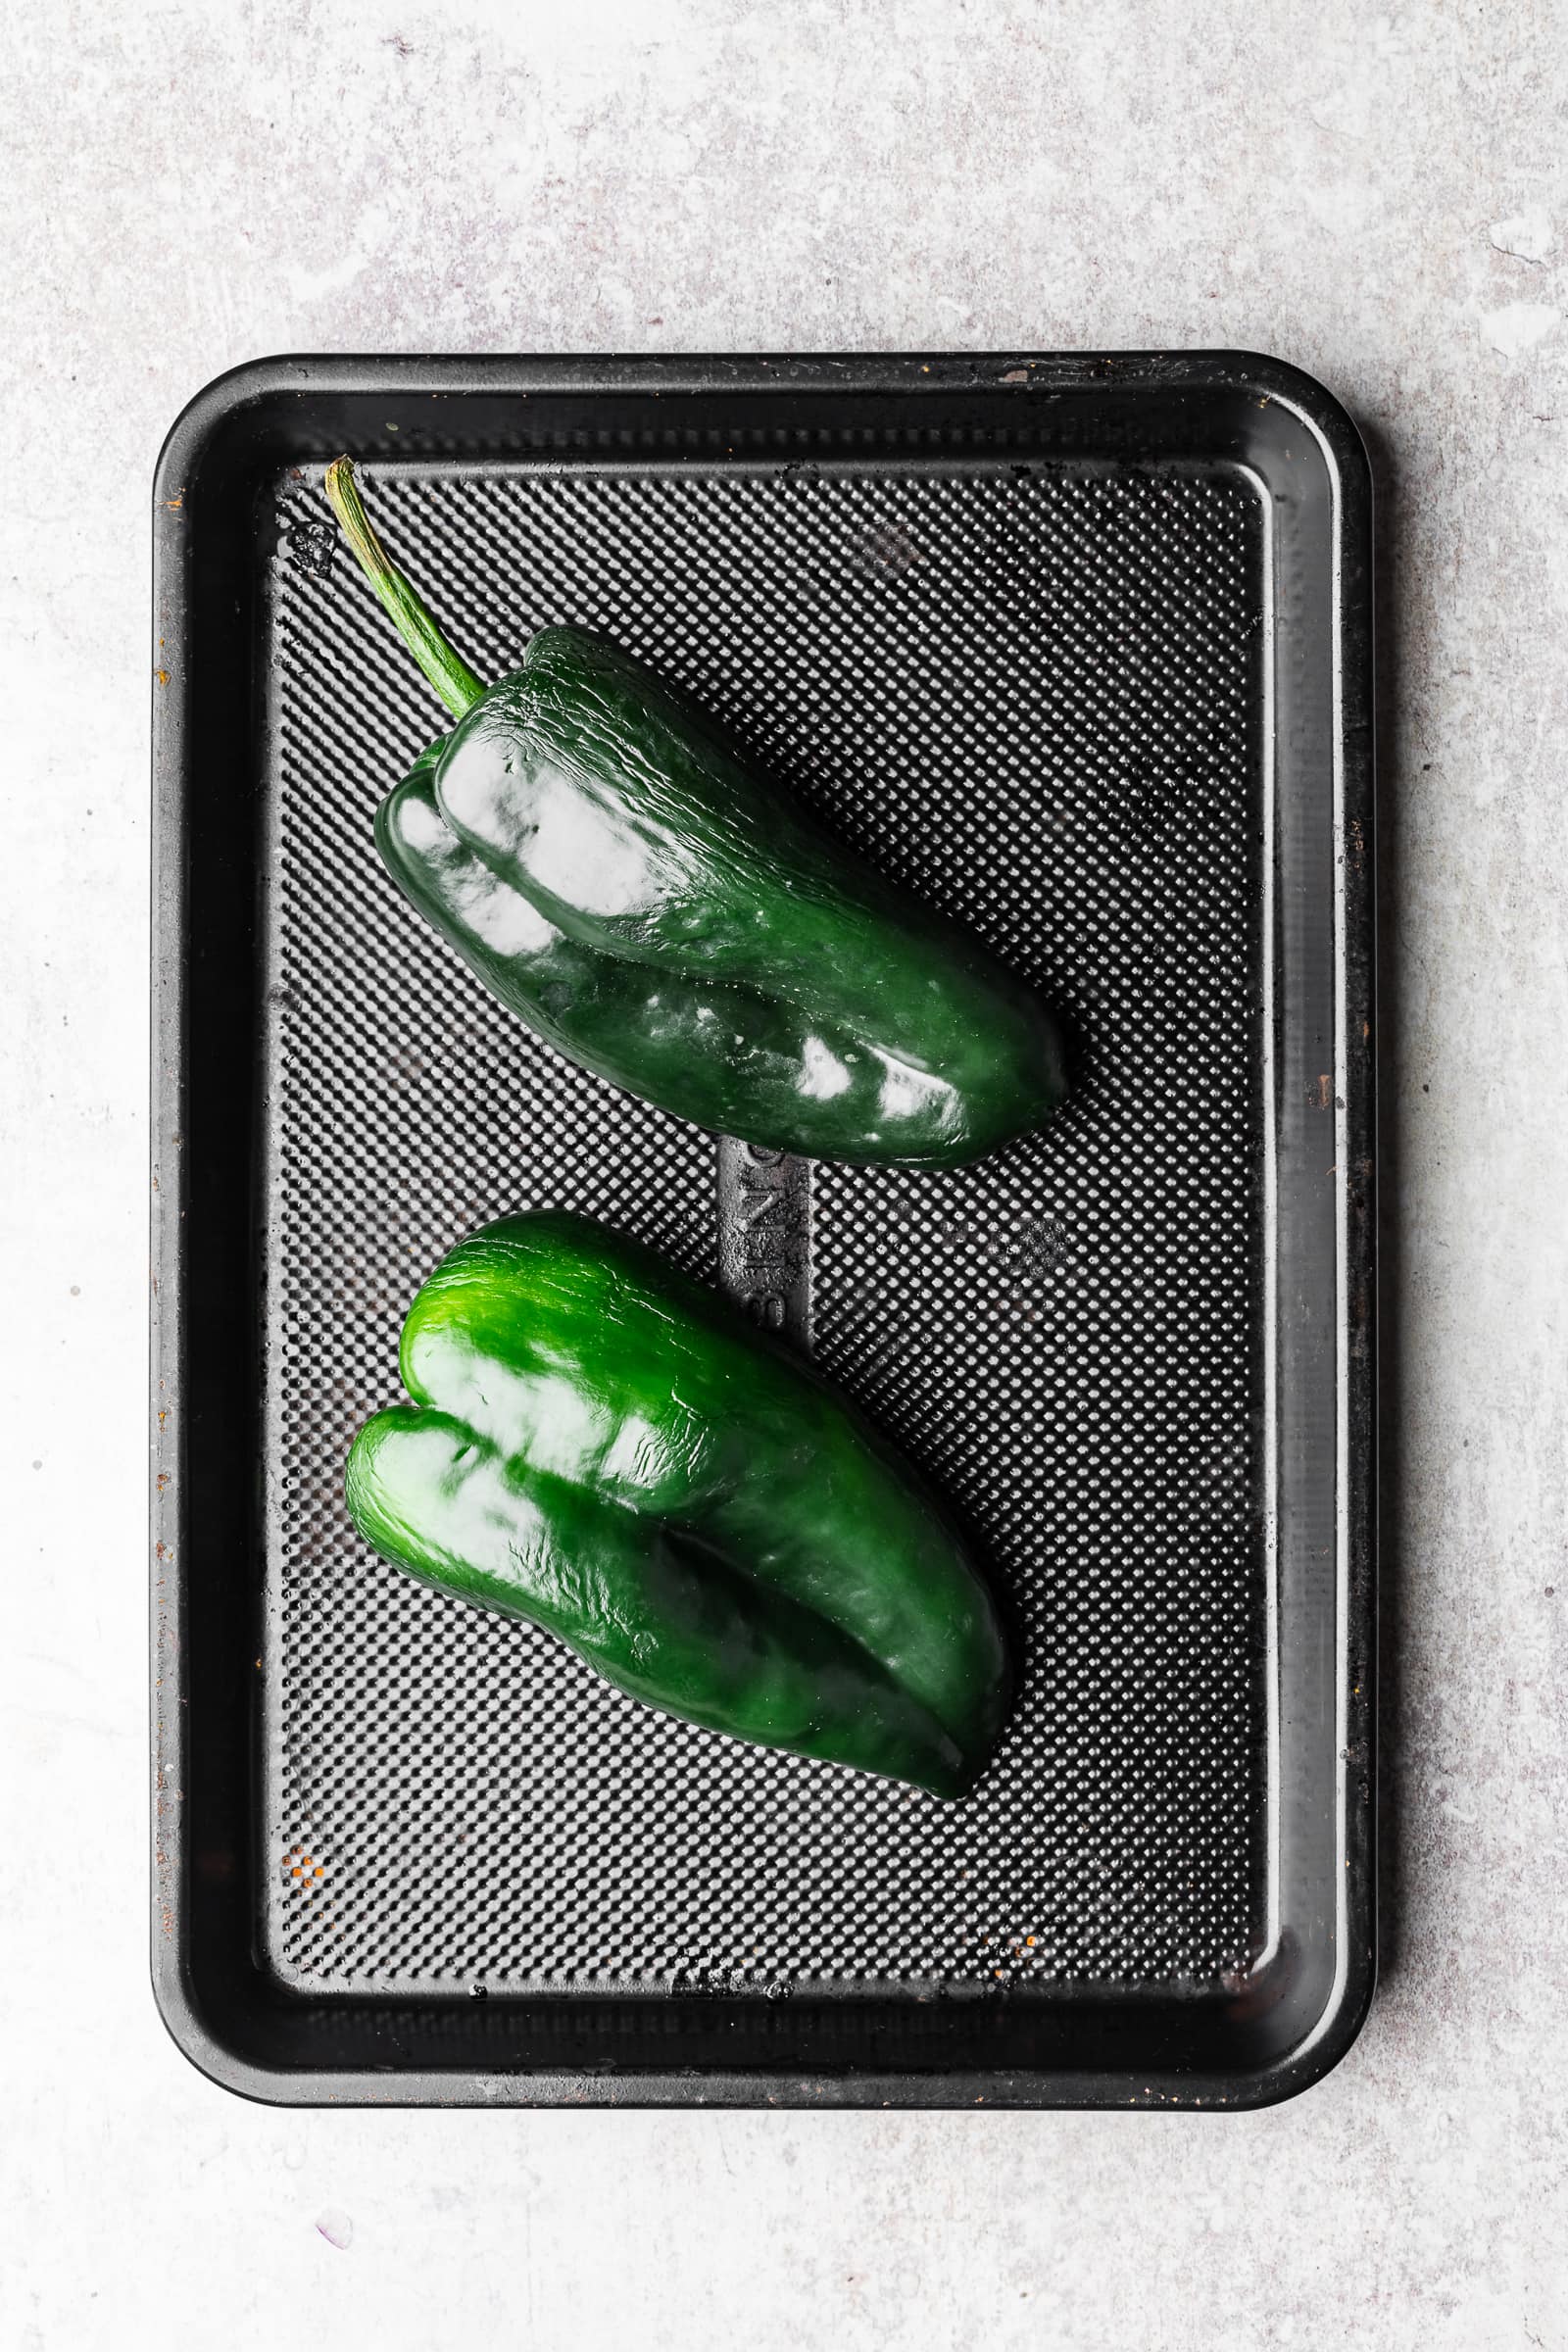 Poblano peppers on a black baking pan.